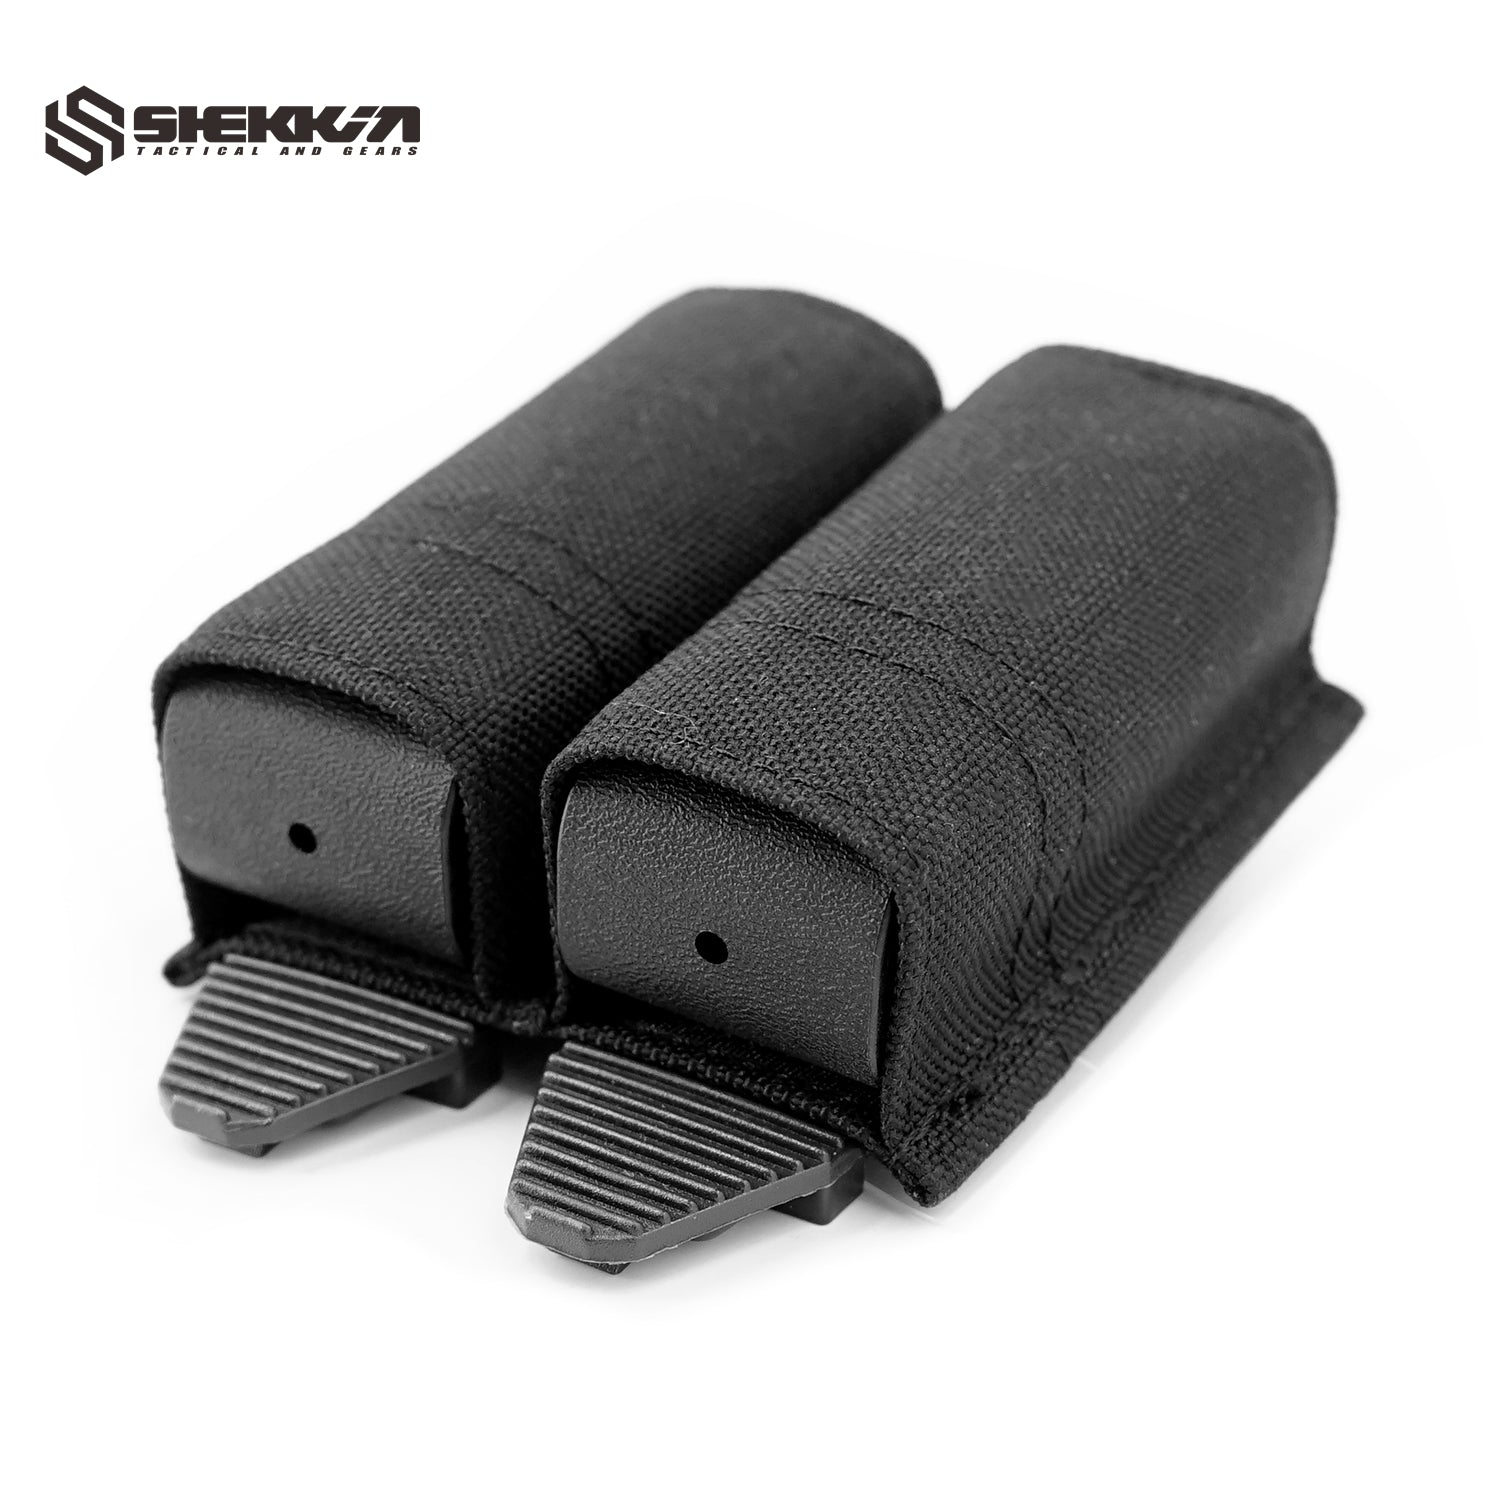 Kywi double 9mm mag Pouch